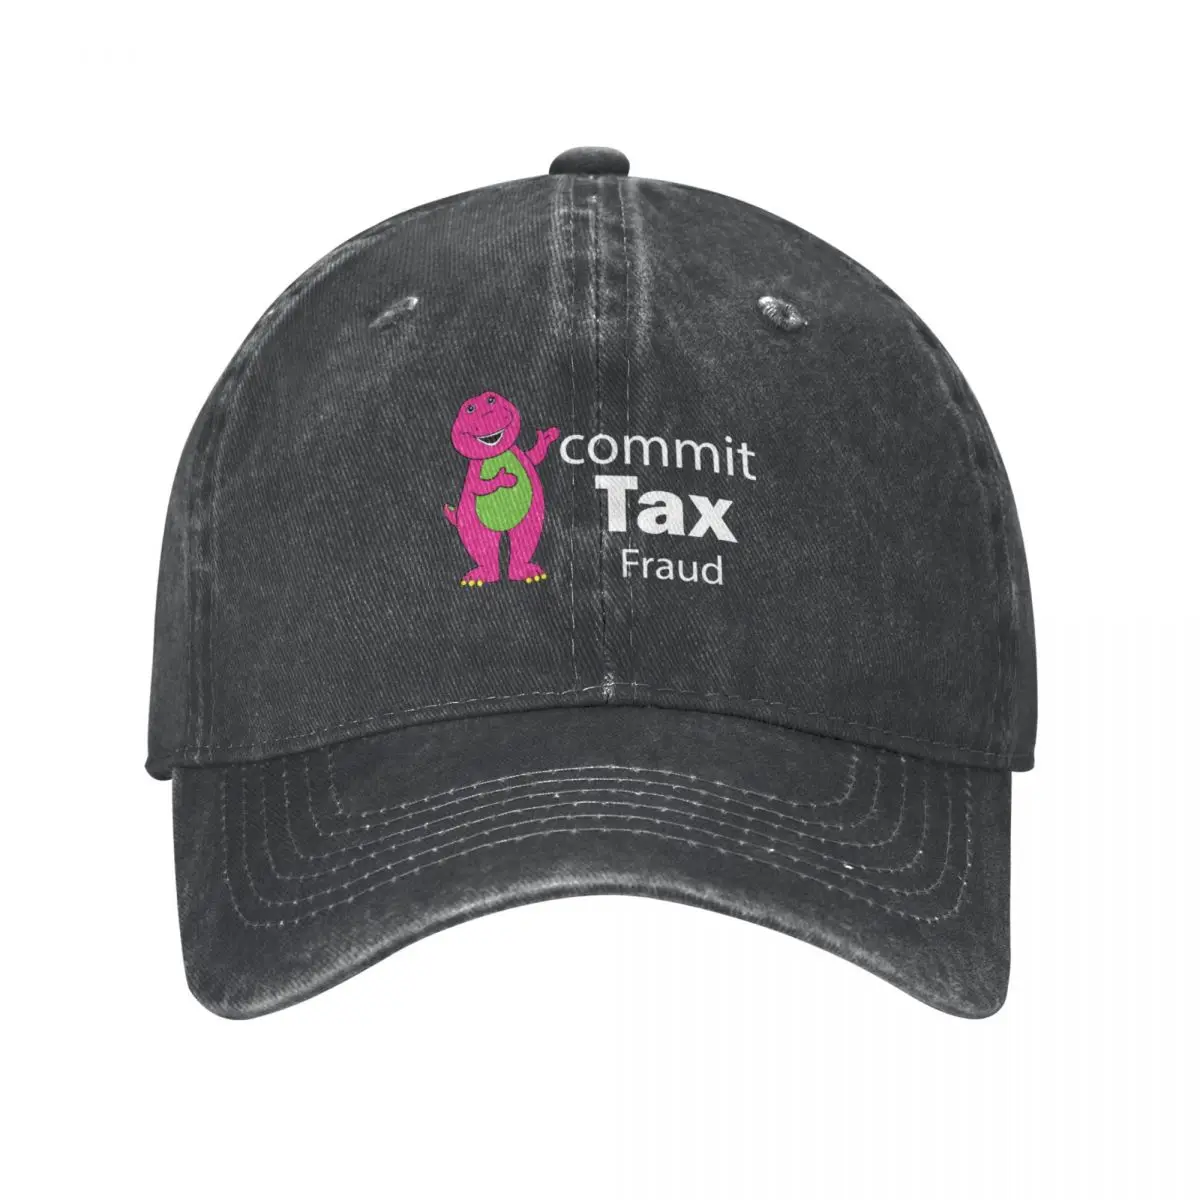 

Commit Tax Fraud Barney And Friends Unisex Baseball Cap Distressed Washed Hats Cap Casual Outdoor Summer Adjustable Snapback Hat